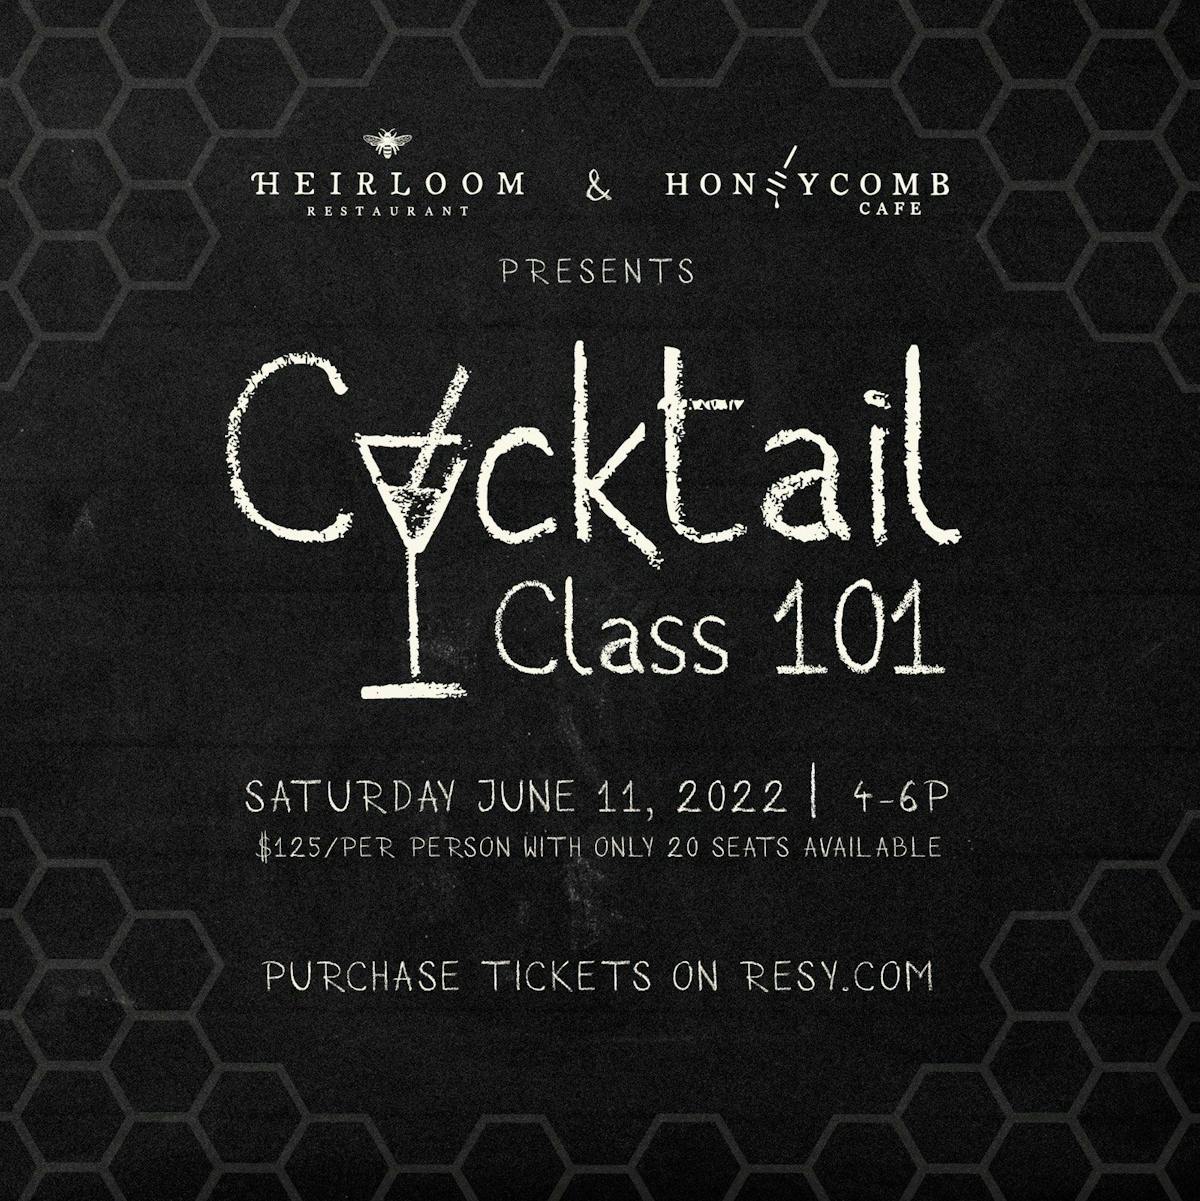 Cocktail class information 